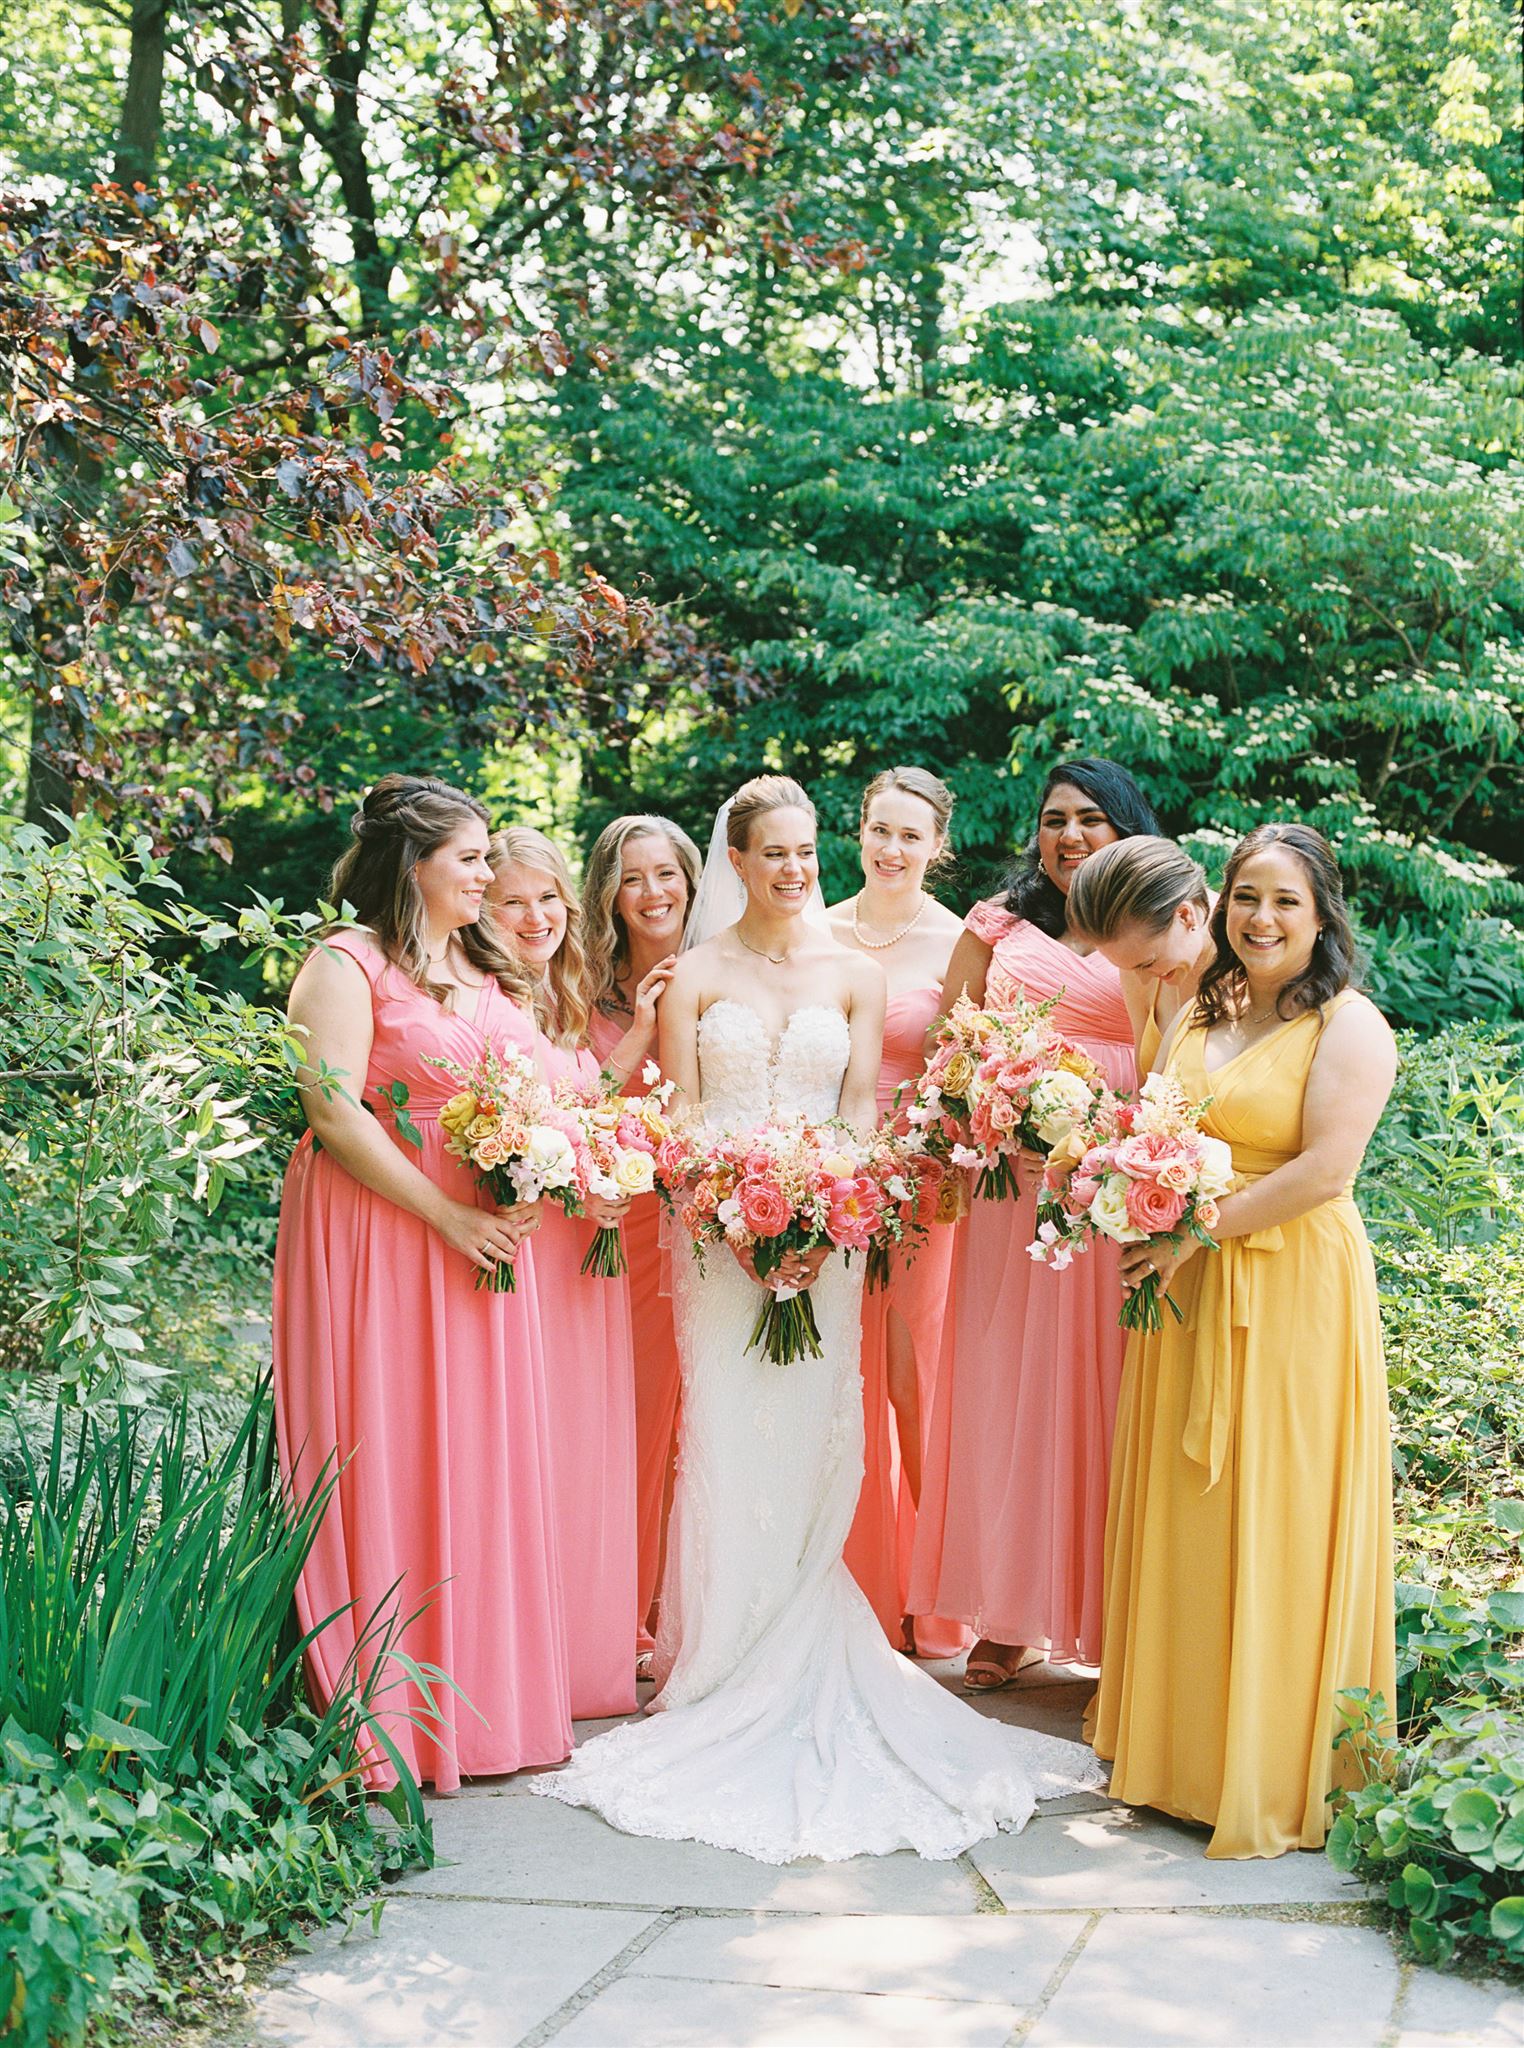 colorful summer wedding with vibrant bridesmaids dresses